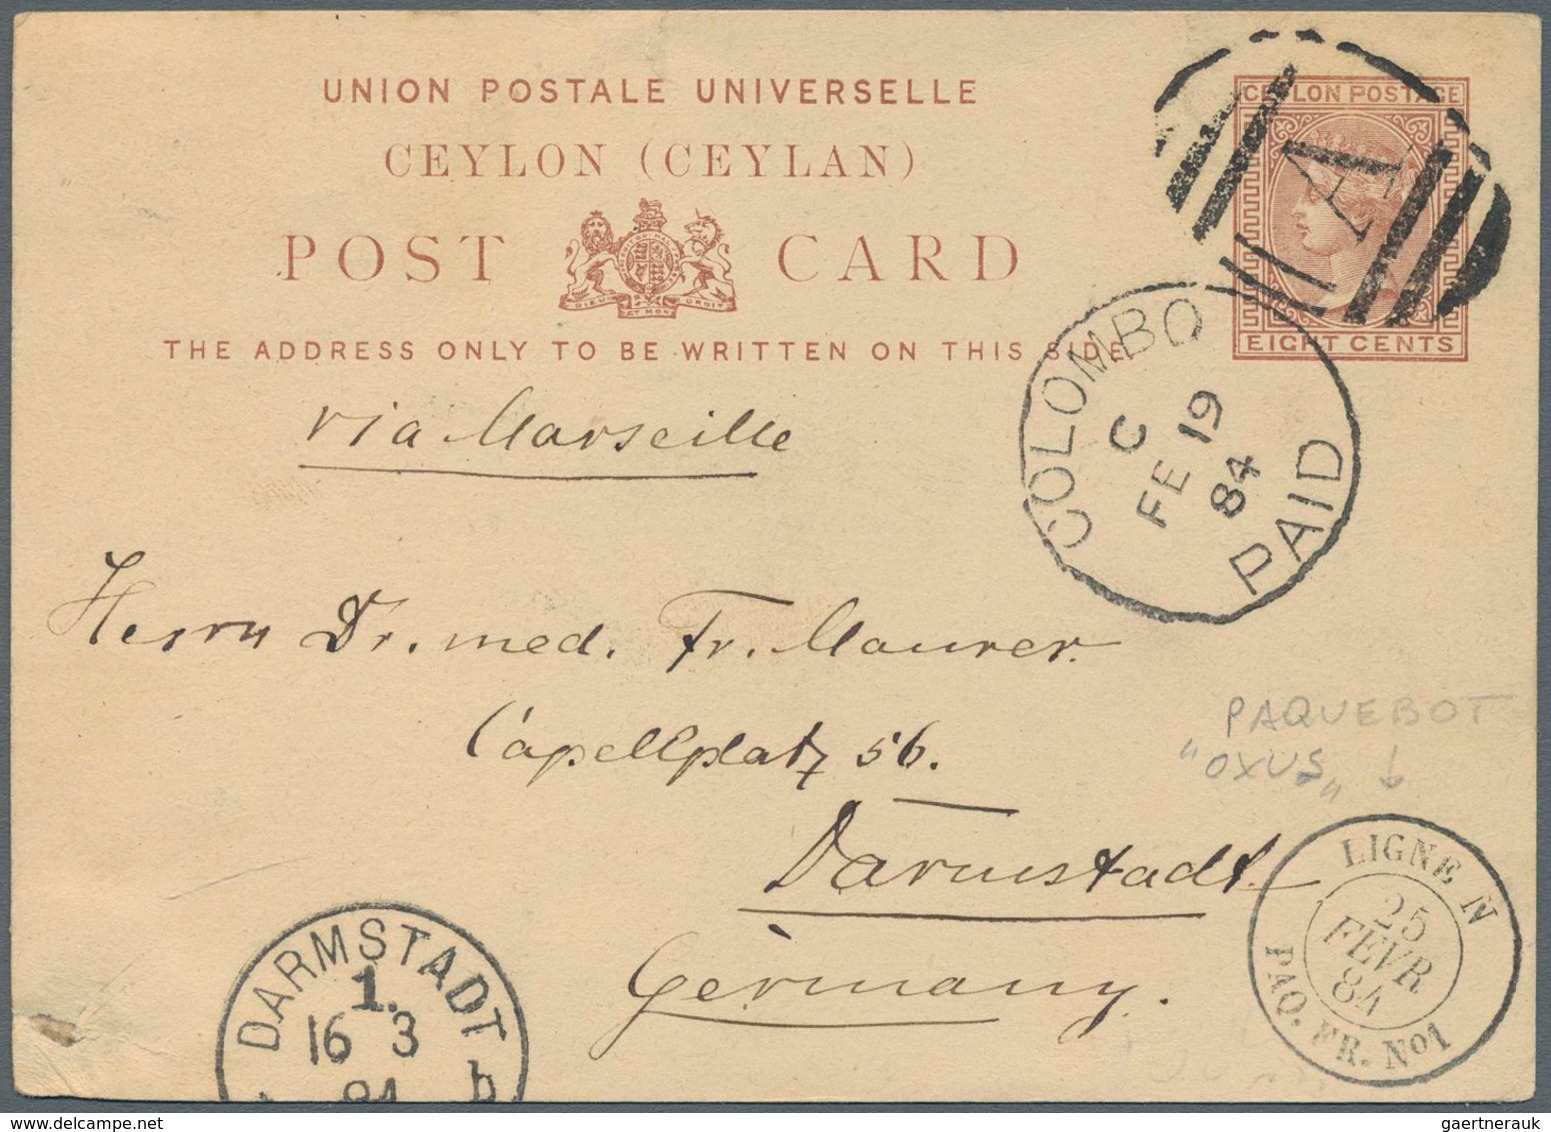 22364 Ceylon / Sri Lanka: 1879-1940's: Collection of 46 postal stationery items used, with postcards, repl